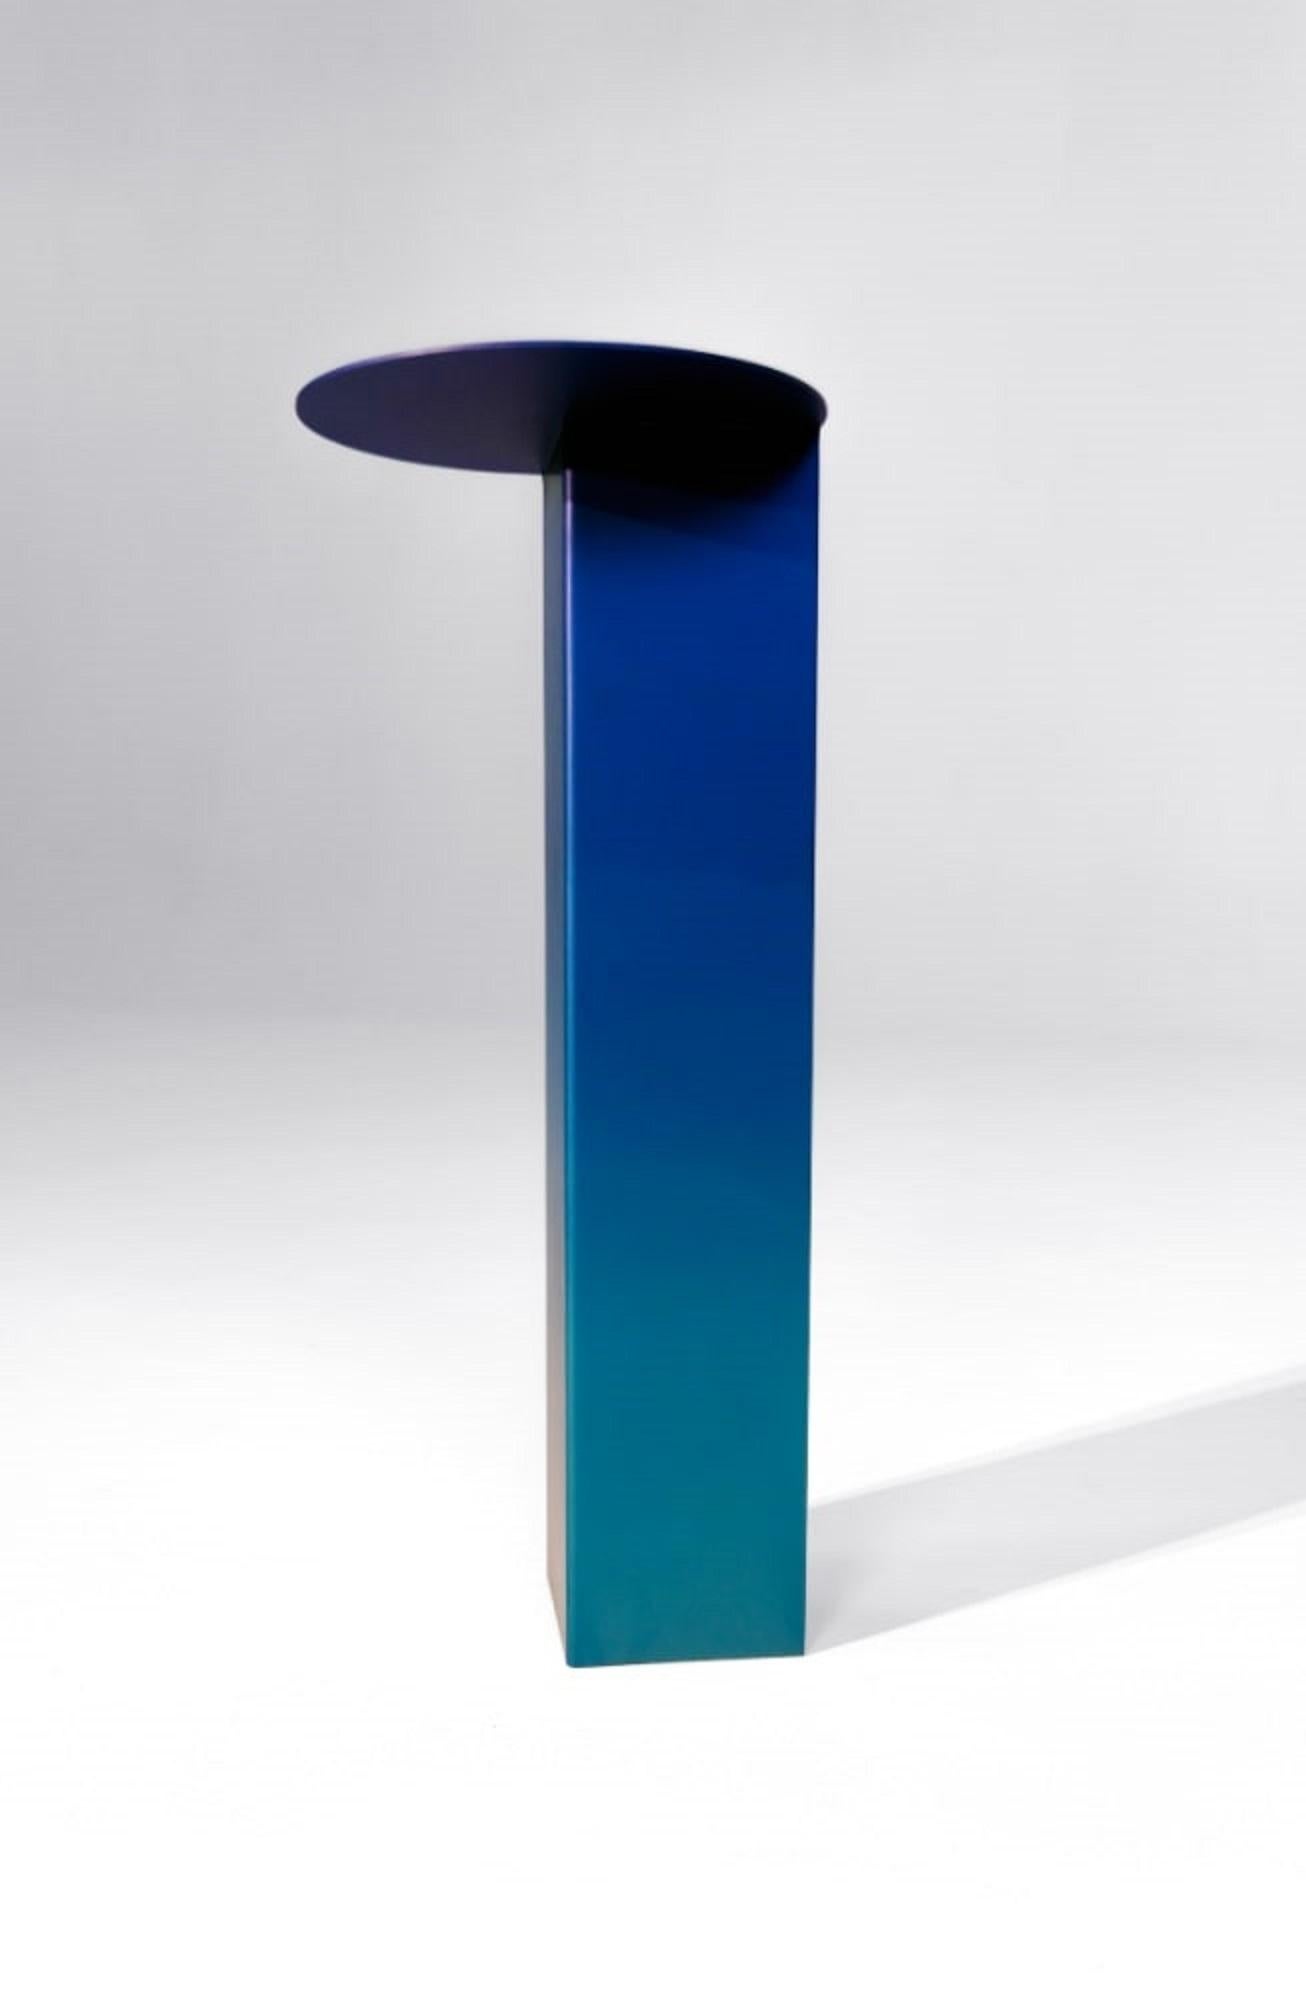 This elegant umbrella stand perfect for elevated entryways or contemporary spaces. Composed of two elements, the bin and the shelf, Magritte’s umbrella stand serves as an entryway storage surface for keys and wallets while also storing a single